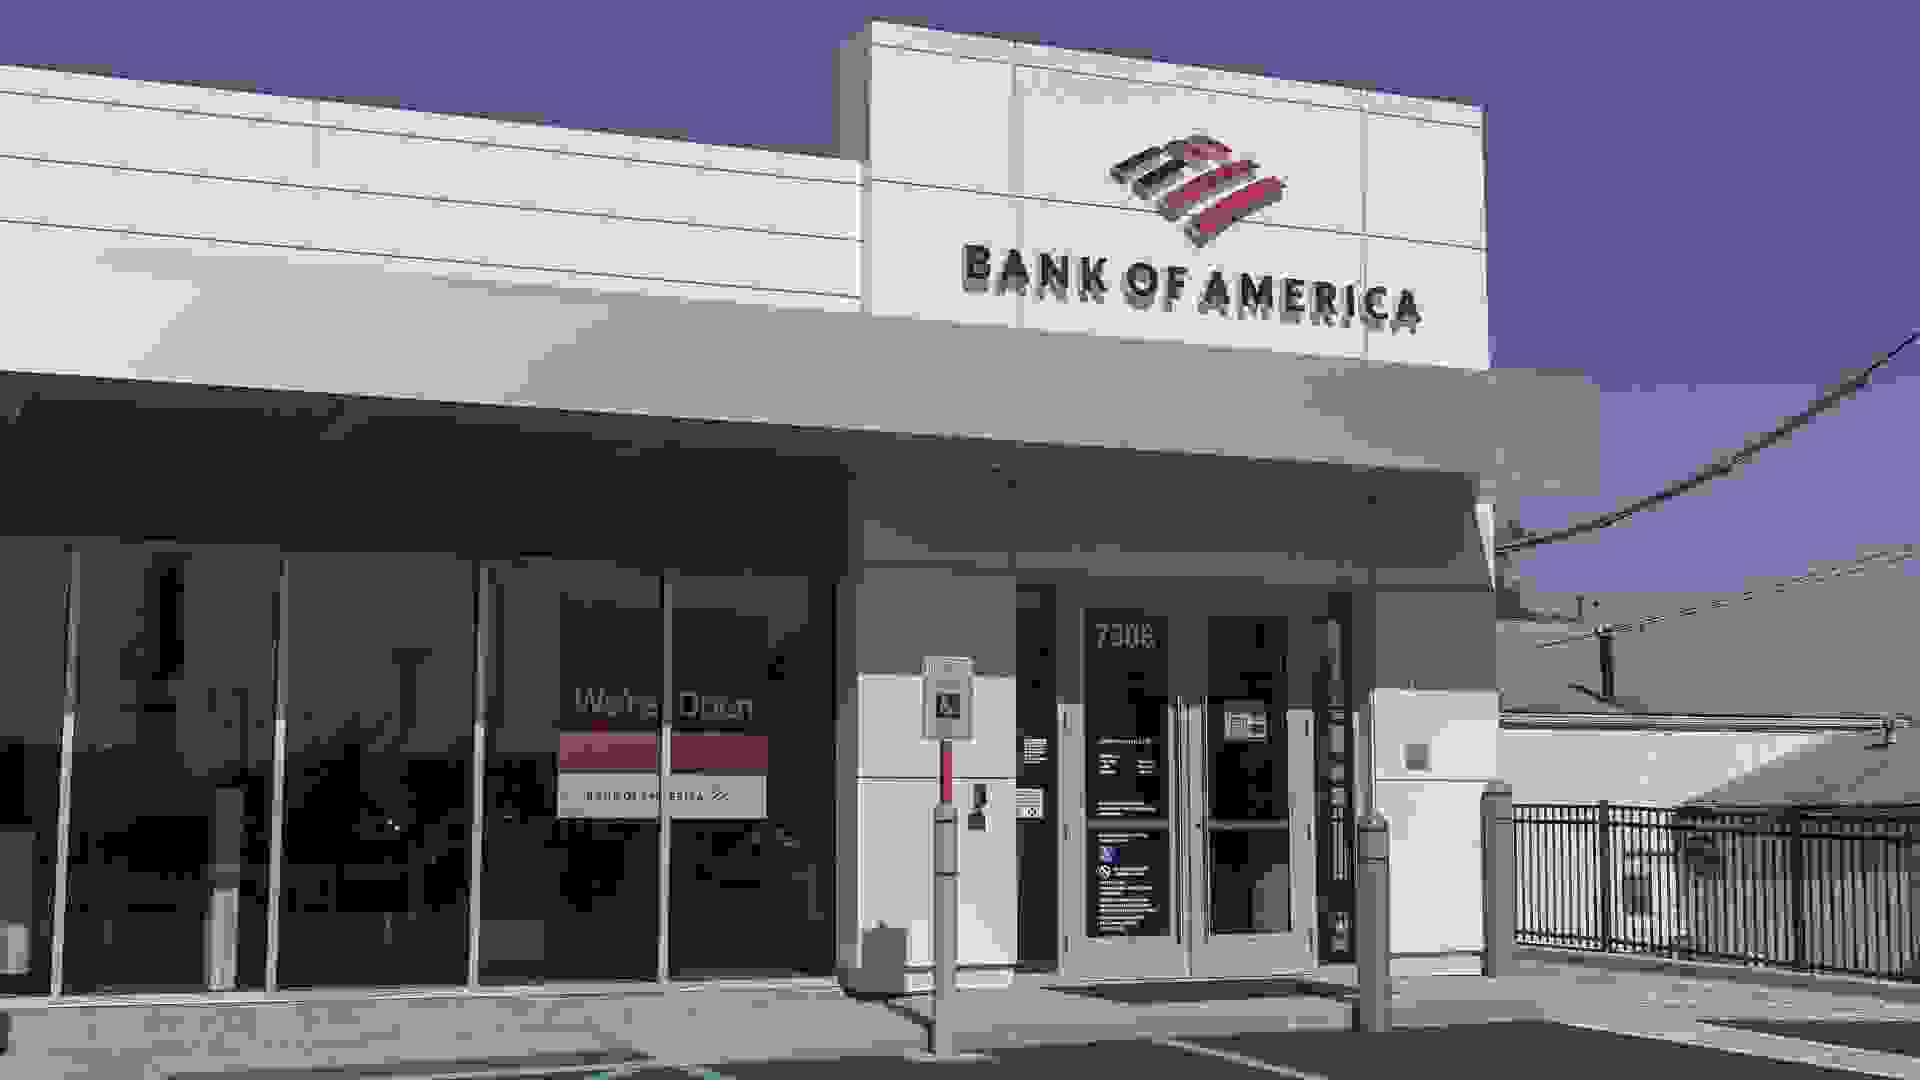 Bank of America investment bank and loan Branch. Bank of America is also known as BofA or BAC. stock photo